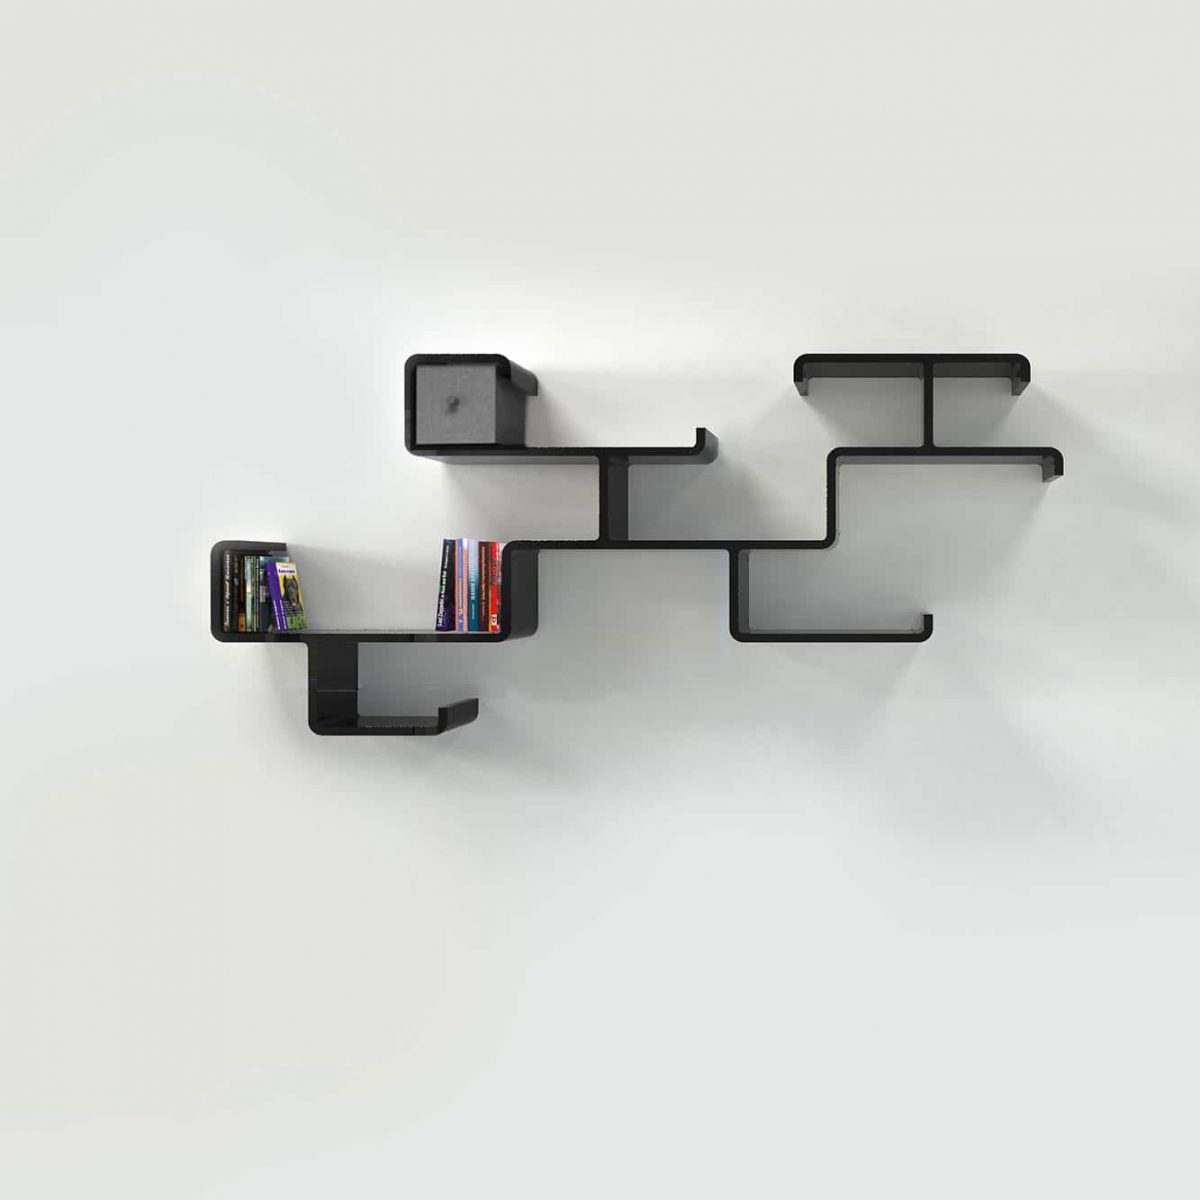 https://expandfurniture.com/wp-content/uploads/2015/09/Wall-shelving-Branch-in-Black-with-grey-bin-1-1200x1200-cropped.jpg